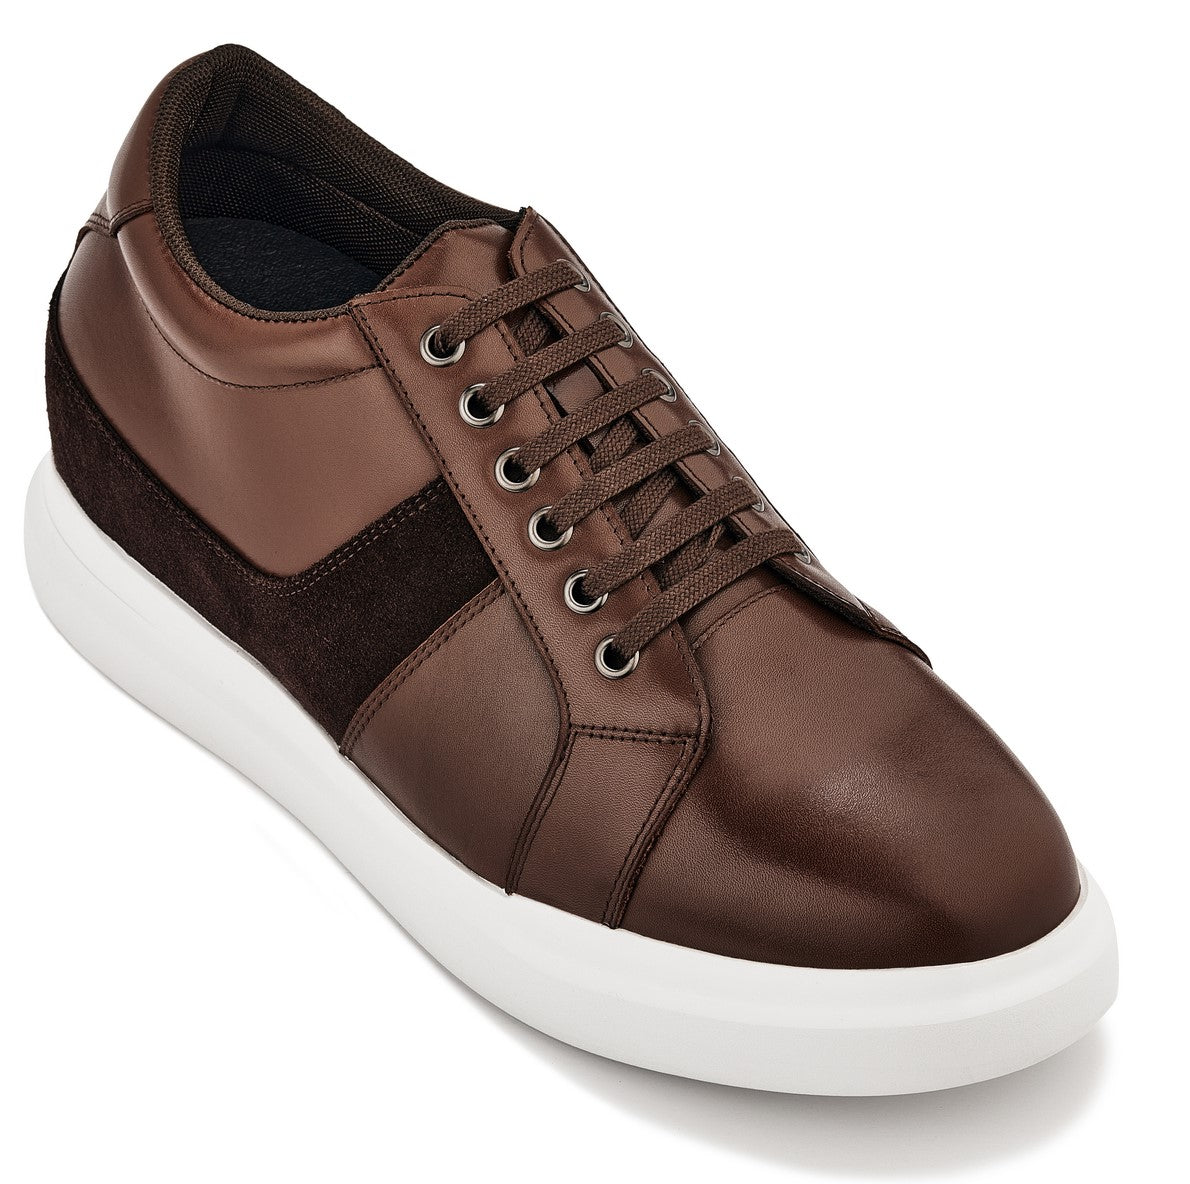 CALTO - K1532 - 3 Inches Taller (Coffee Brown) - Lightweight Leather Sneakers